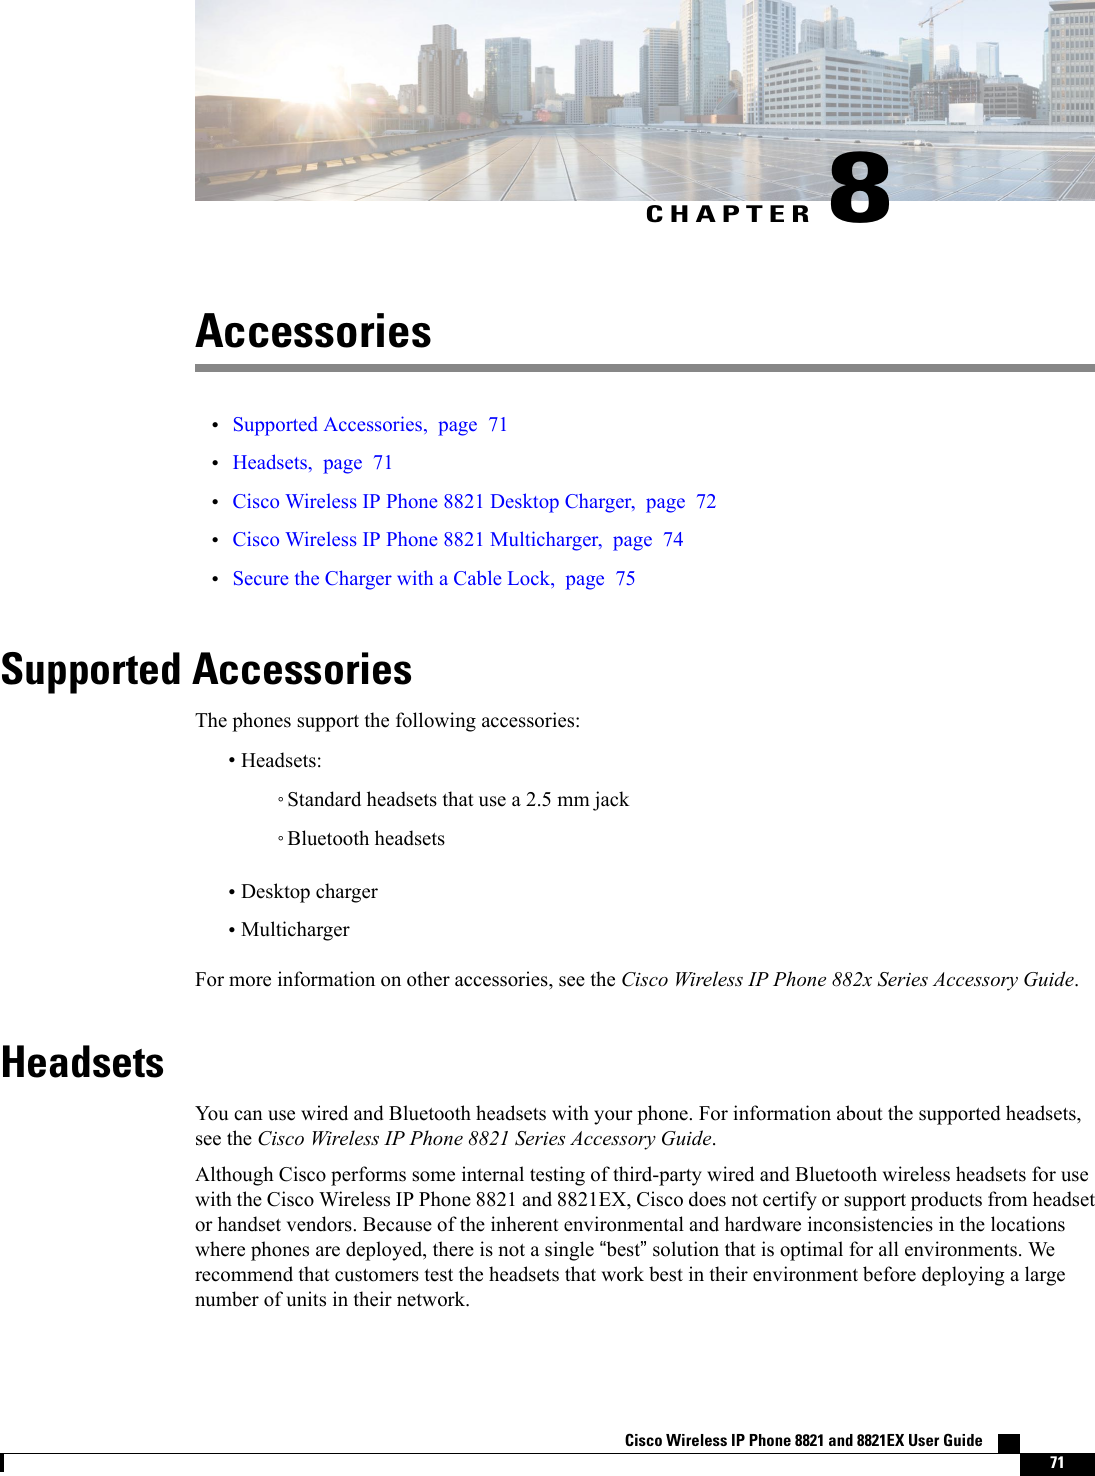 CHAPTER 8Accessories•Supported Accessories, page 71•Headsets, page 71•Cisco Wireless IP Phone 8821 Desktop Charger, page 72•Cisco Wireless IP Phone 8821 Multicharger, page 74•Secure the Charger with a Cable Lock, page 75Supported AccessoriesThe phones support the following accessories:•Headsets:◦Standard headsets that use a 2.5 mm jack◦Bluetooth headsets•Desktop charger•MultichargerFor more information on other accessories, see the Cisco Wireless IP Phone 882x Series Accessory Guide.HeadsetsYou can use wired and Bluetooth headsets with your phone. For information about the supported headsets,see the Cisco Wireless IP Phone 8821 Series Accessory Guide.Although Cisco performs some internal testing of third-party wired and Bluetooth wireless headsets for usewith the Cisco Wireless IP Phone 8821 and 8821EX, Cisco does not certify or support products from headsetor handset vendors. Because of the inherent environmental and hardware inconsistencies in the locationswhere phones are deployed, there is not a single “best”solution that is optimal for all environments. Werecommend that customers test the headsets that work best in their environment before deploying a largenumber of units in their network.Cisco Wireless IP Phone 8821 and 8821EX User Guide    71